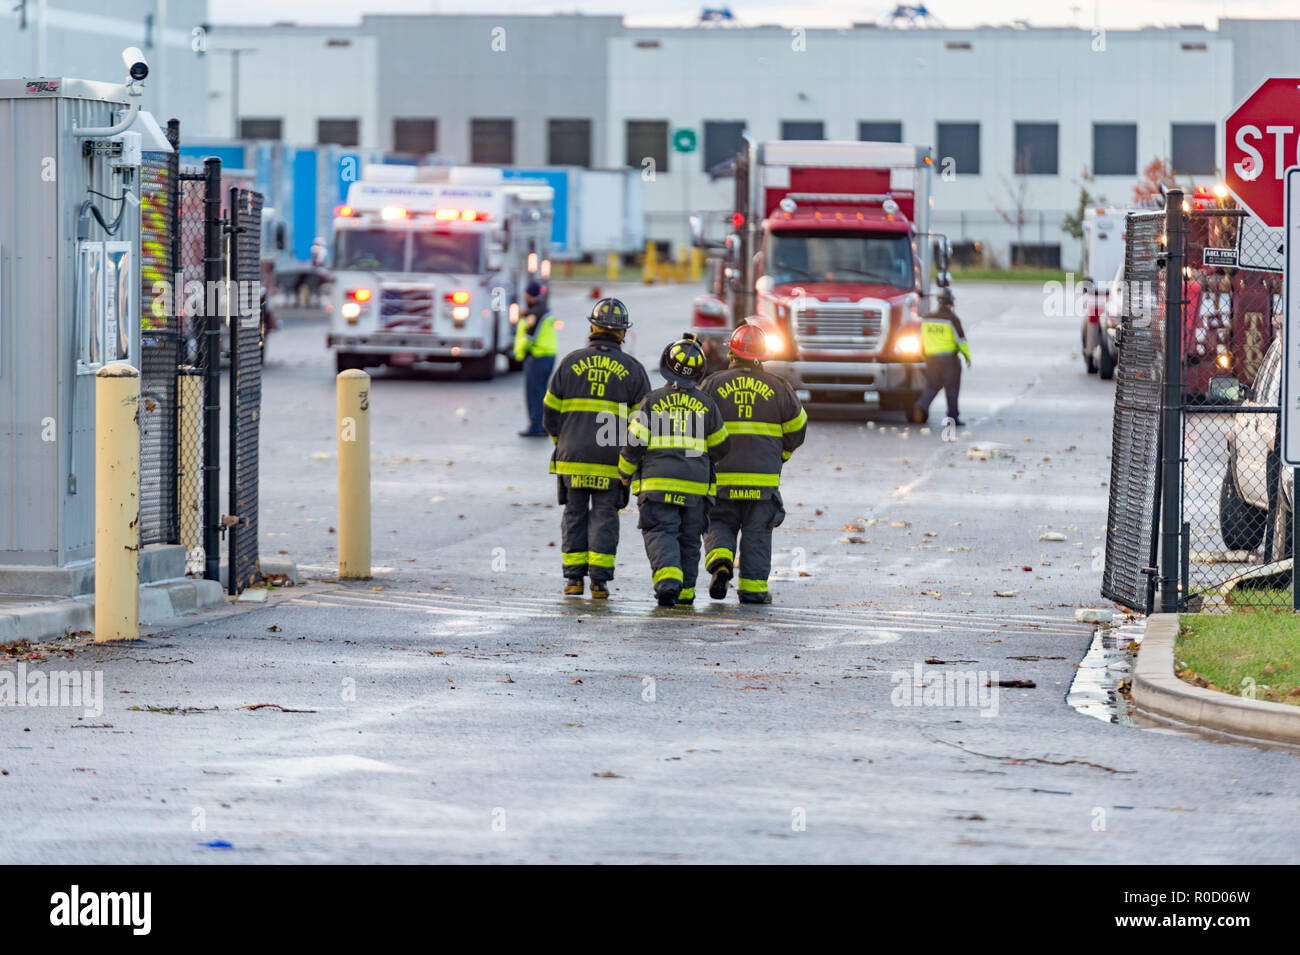 Baltimore, Maryland, USA. 3rd Nov, 2018. Extensive damage can be seen at  the Amazon fulfillment center in Baltimore after sunrise Saturday morning.  The damage is a result of a severe weather event